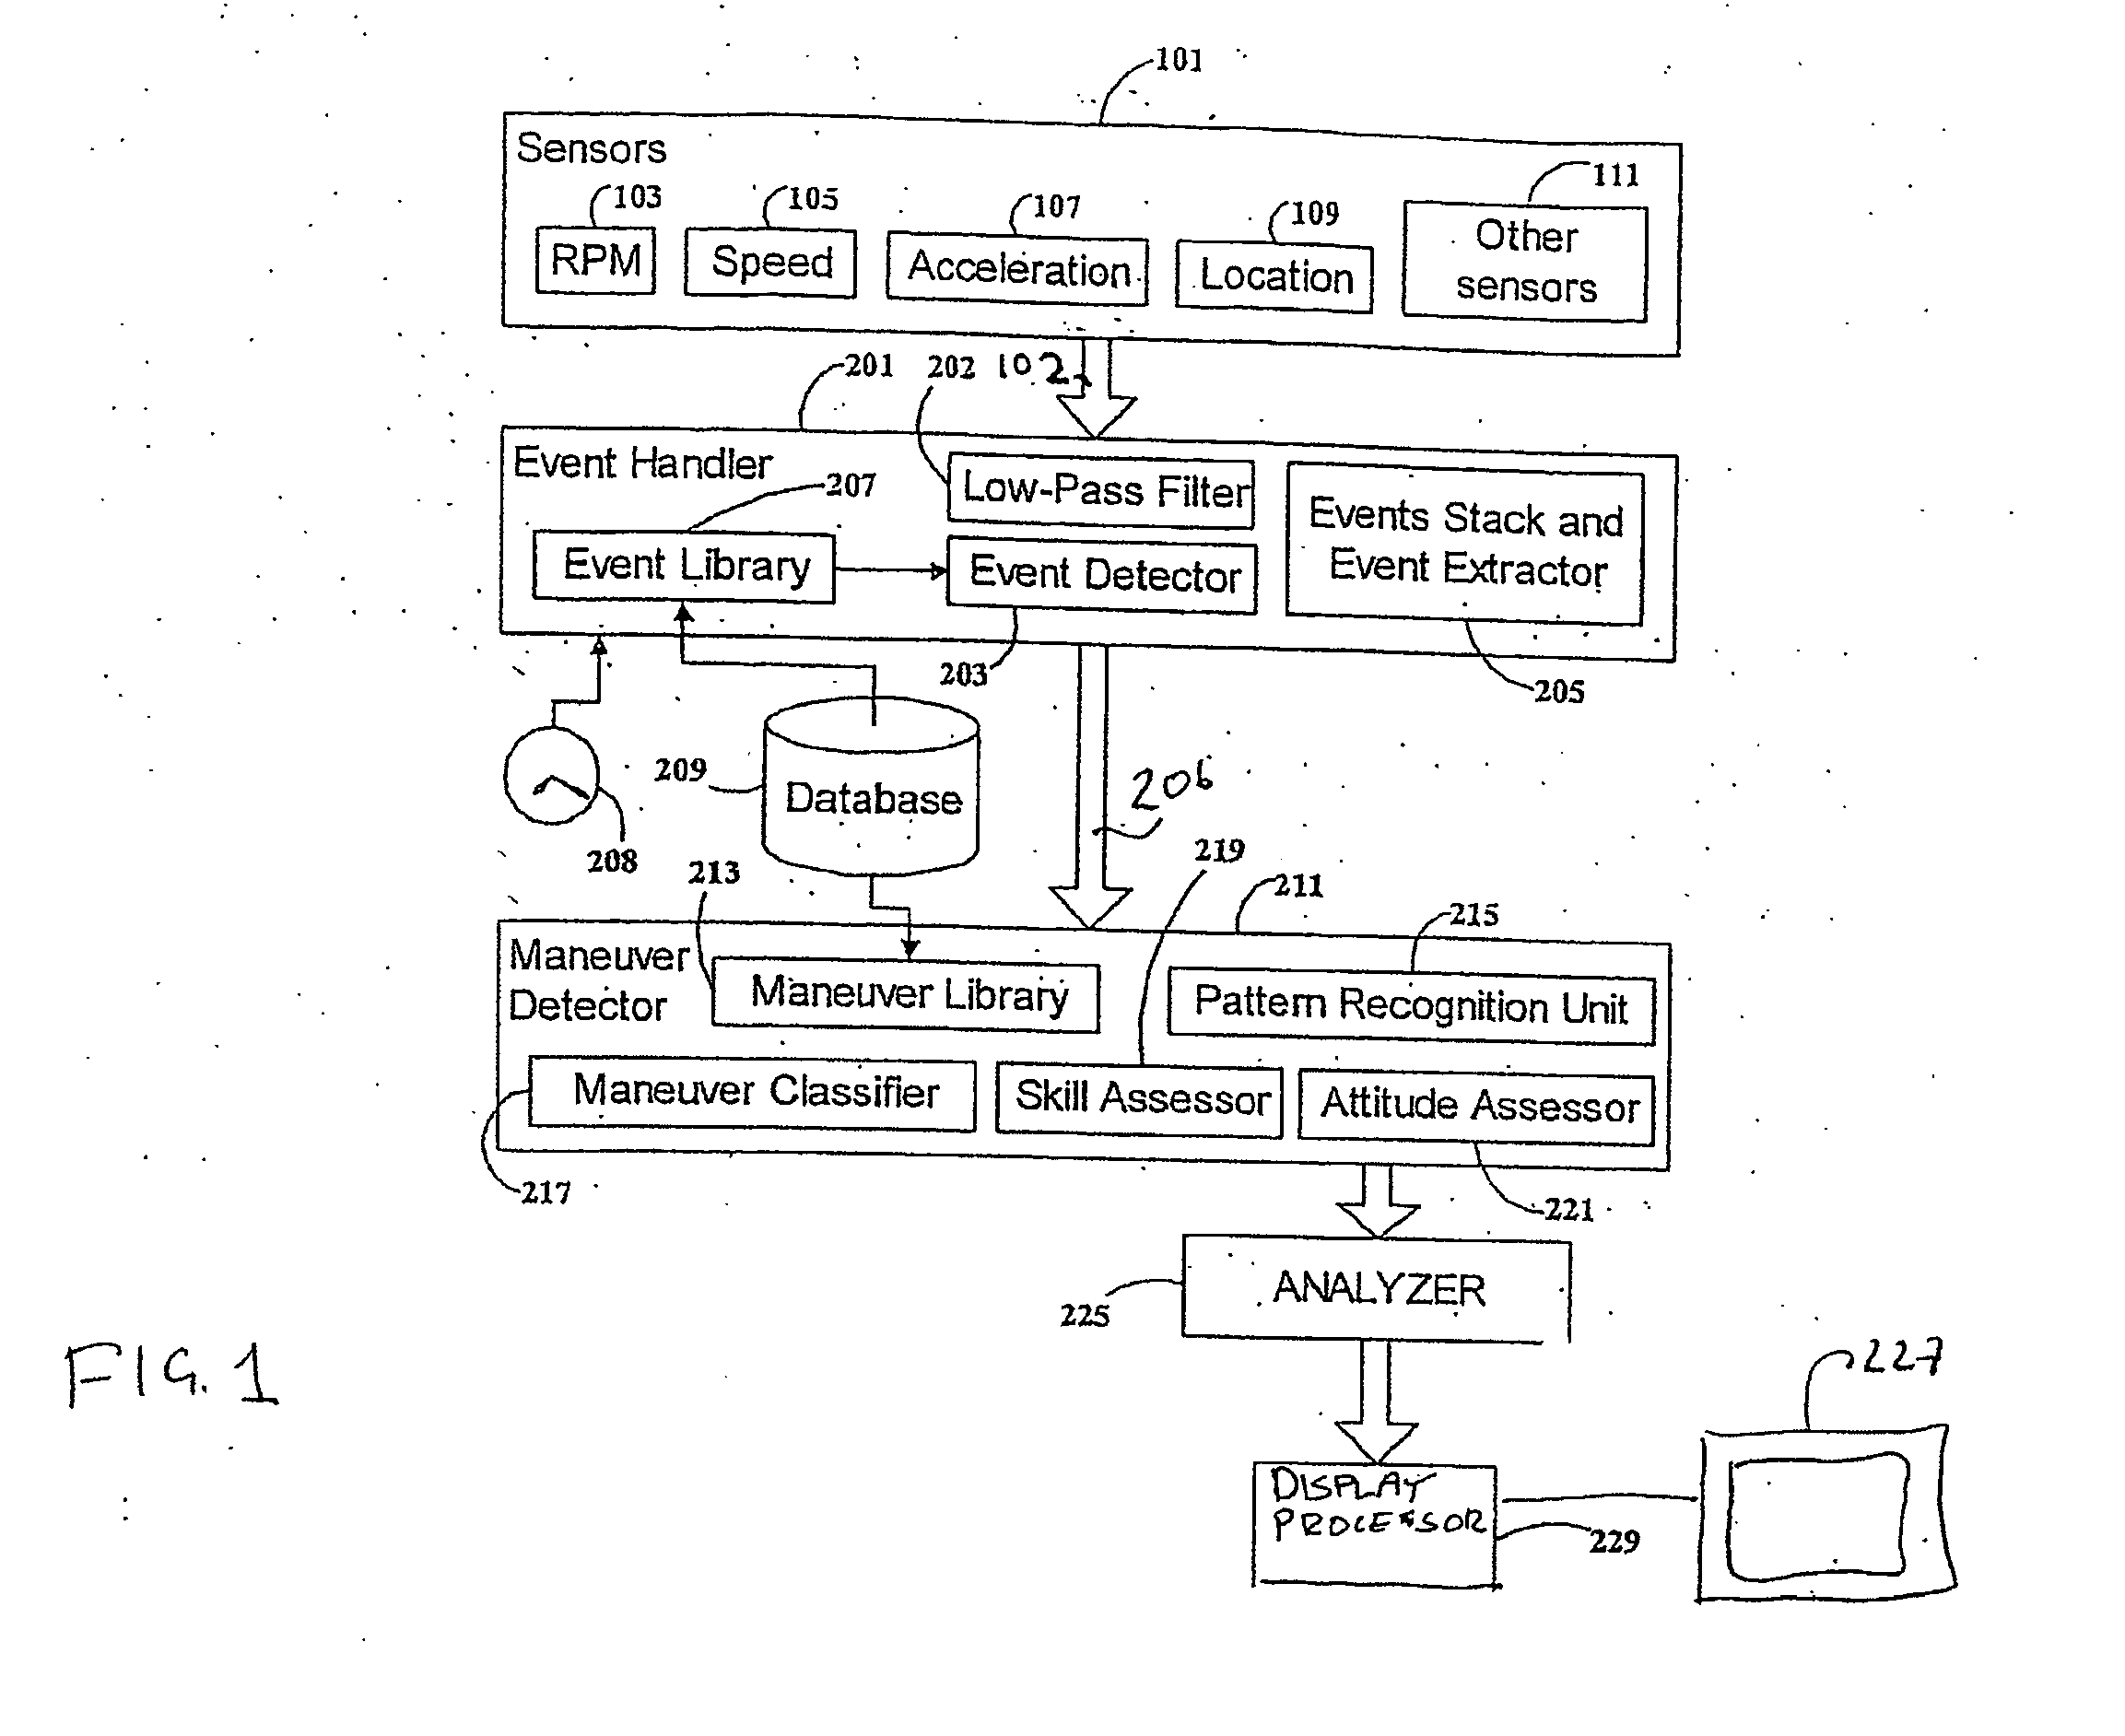 System and method for displaying a driving profile